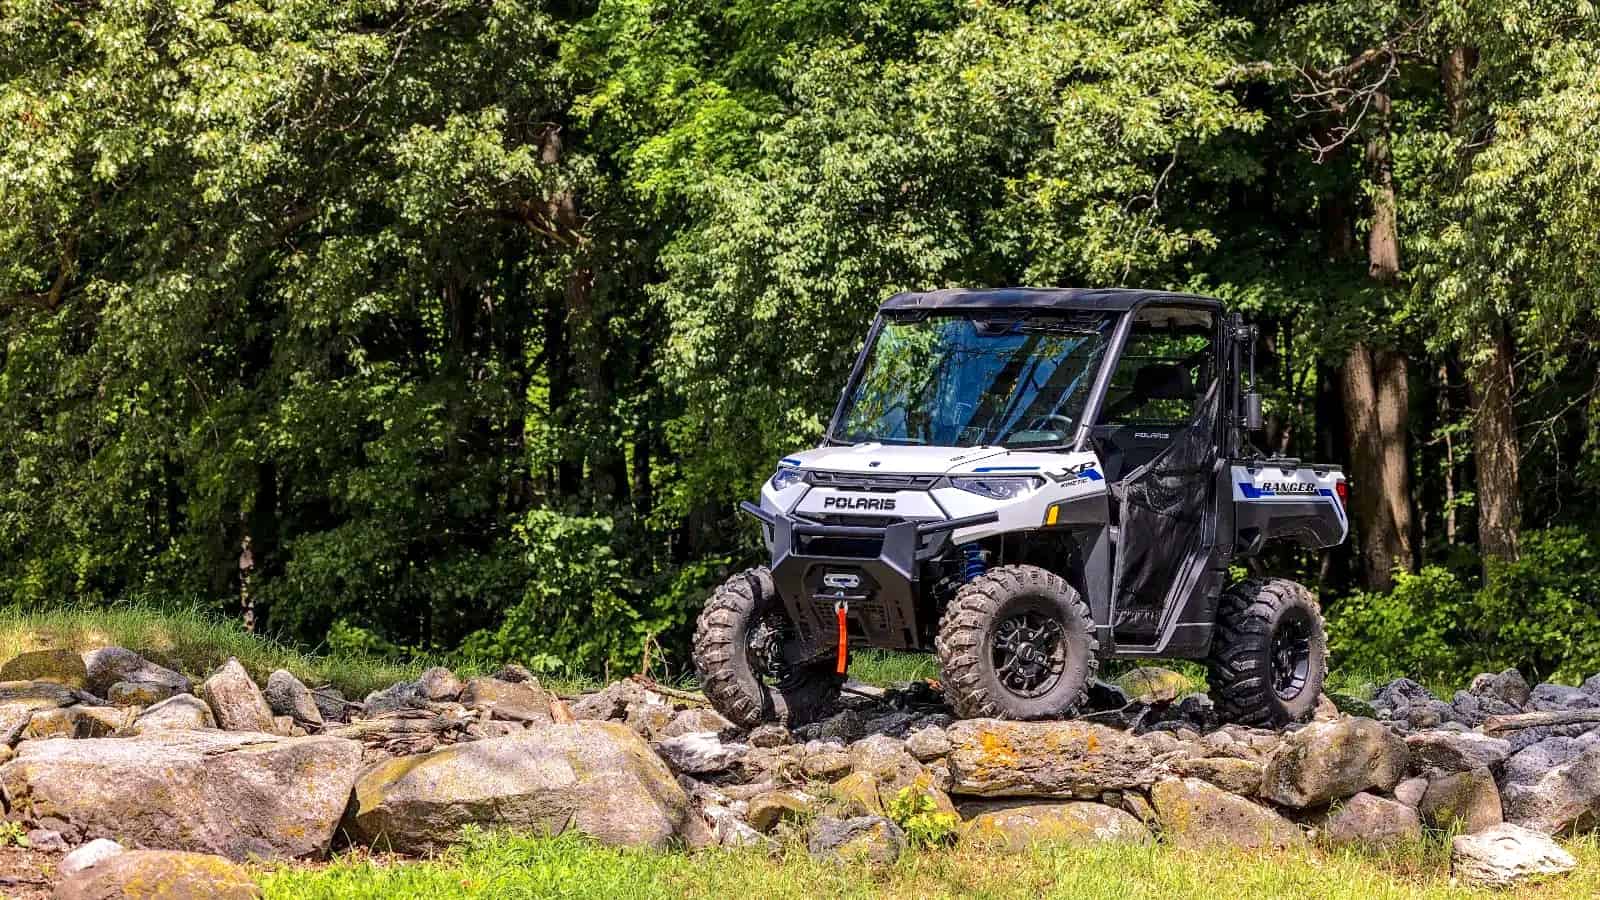 New Electric Off-Road Vehicle Tax Credit Bill Introduced In U.S. Congress Up to $2,500 could flow back to owners of qualifying vehicles, if enacted.